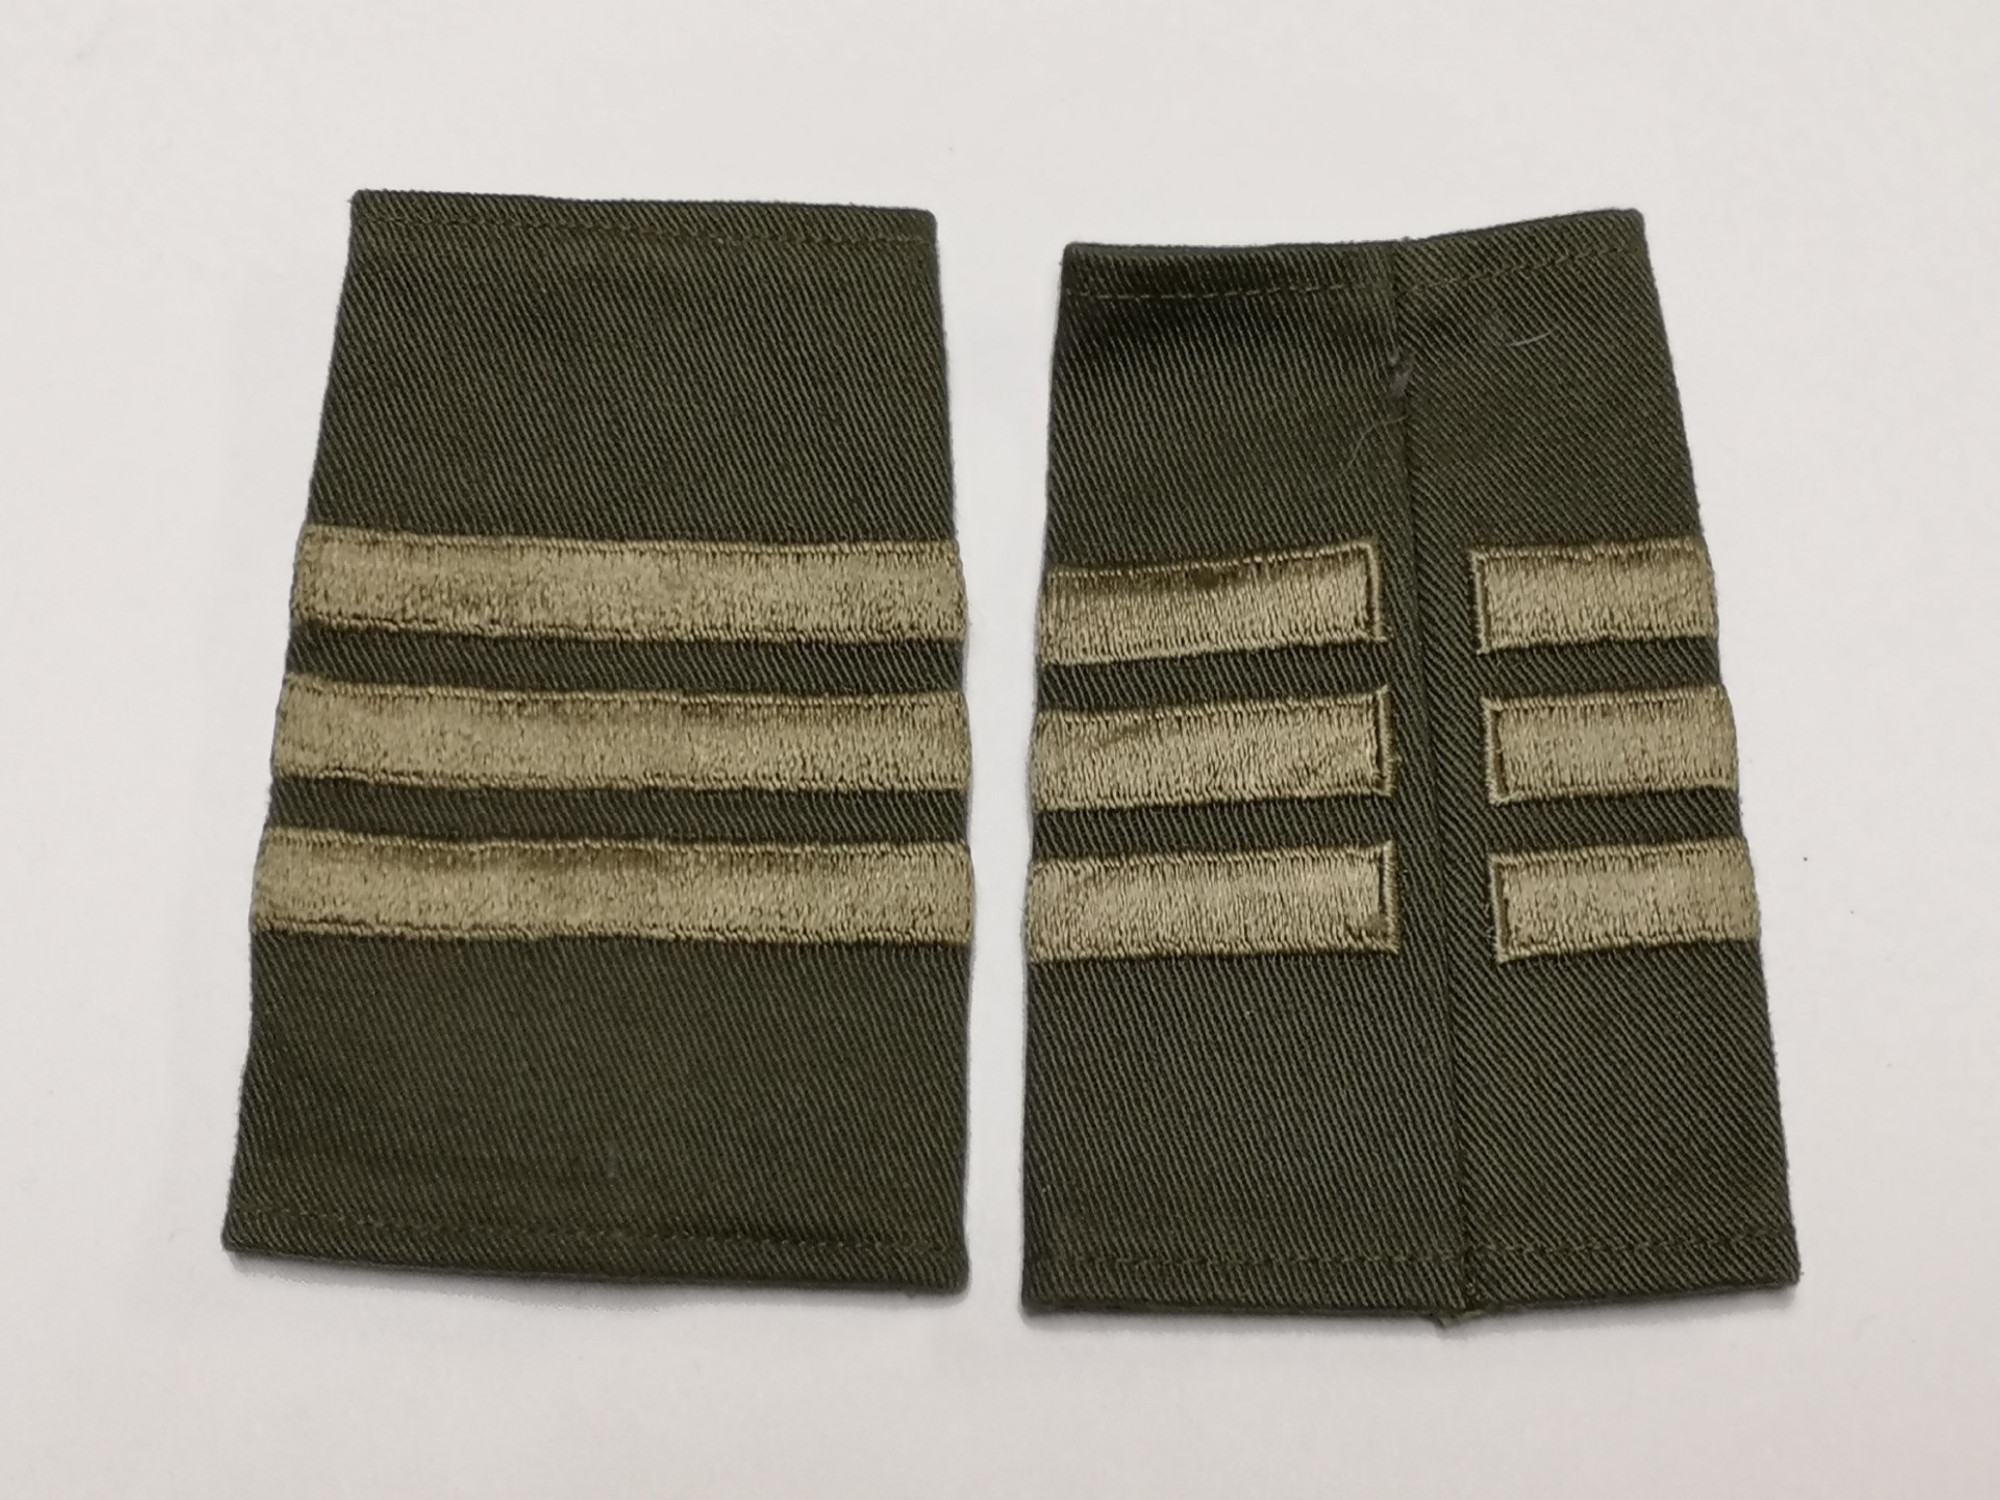 Canadian Armed Forces Green Rank Epaulets Rank Only - Lieutenant-Colonel